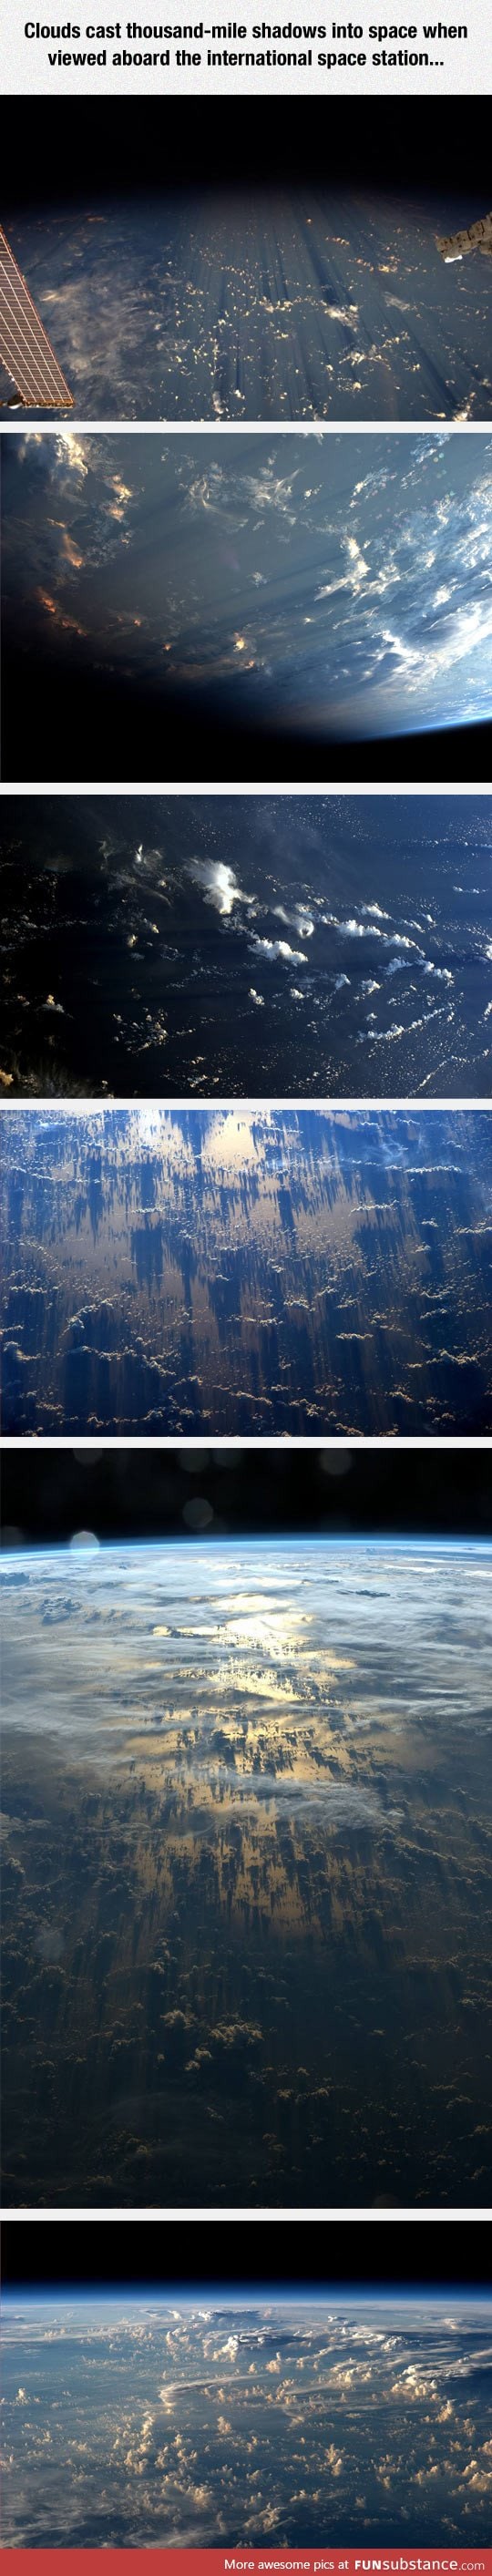 Clouds as viewed from space